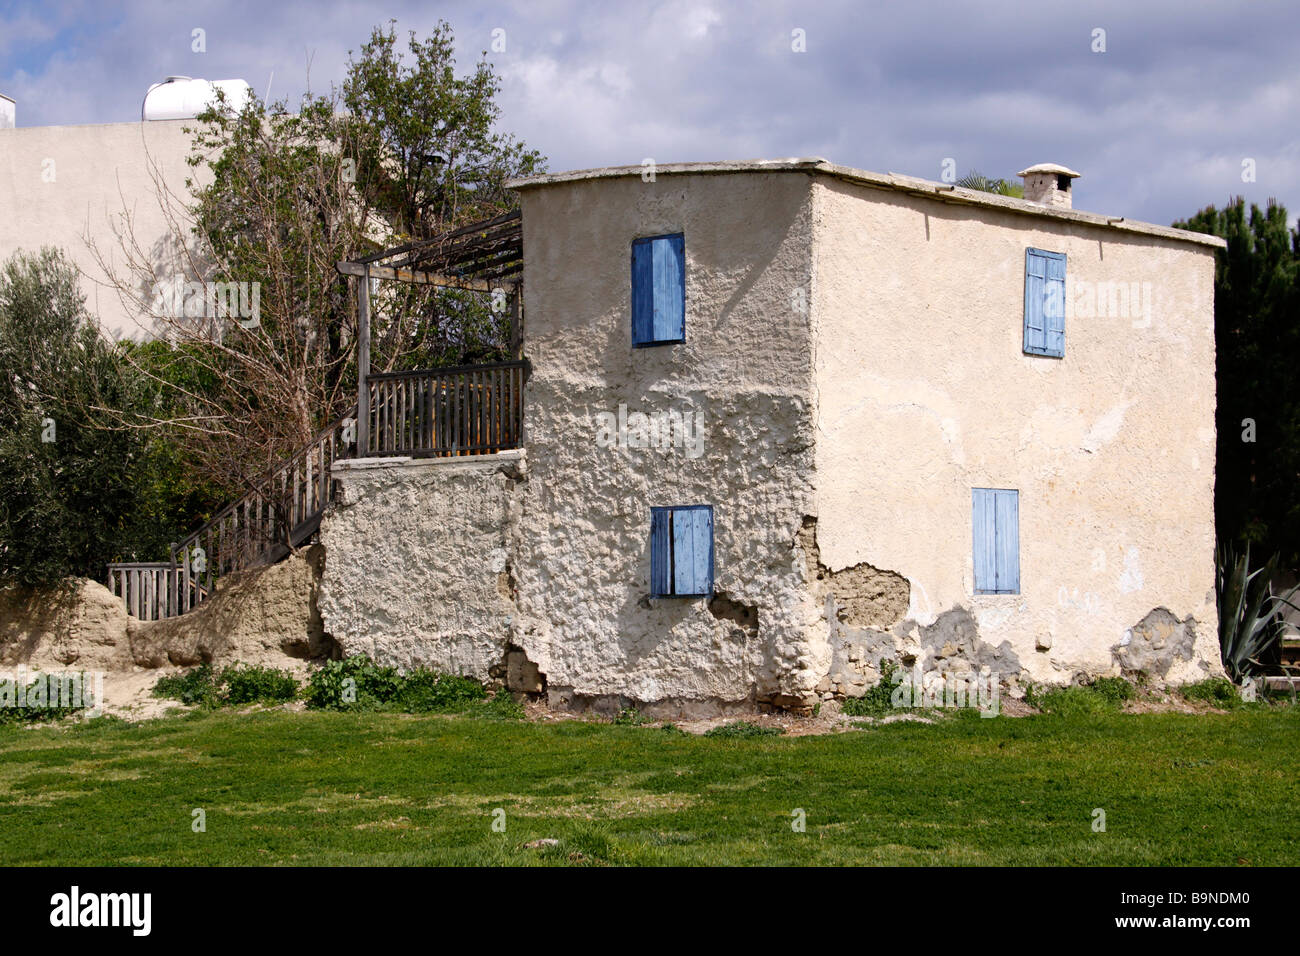 A TRADITIONAL CYPRIOT HOME IN THE VILLAGE OF POLIS. CYPRUS Stock Photo